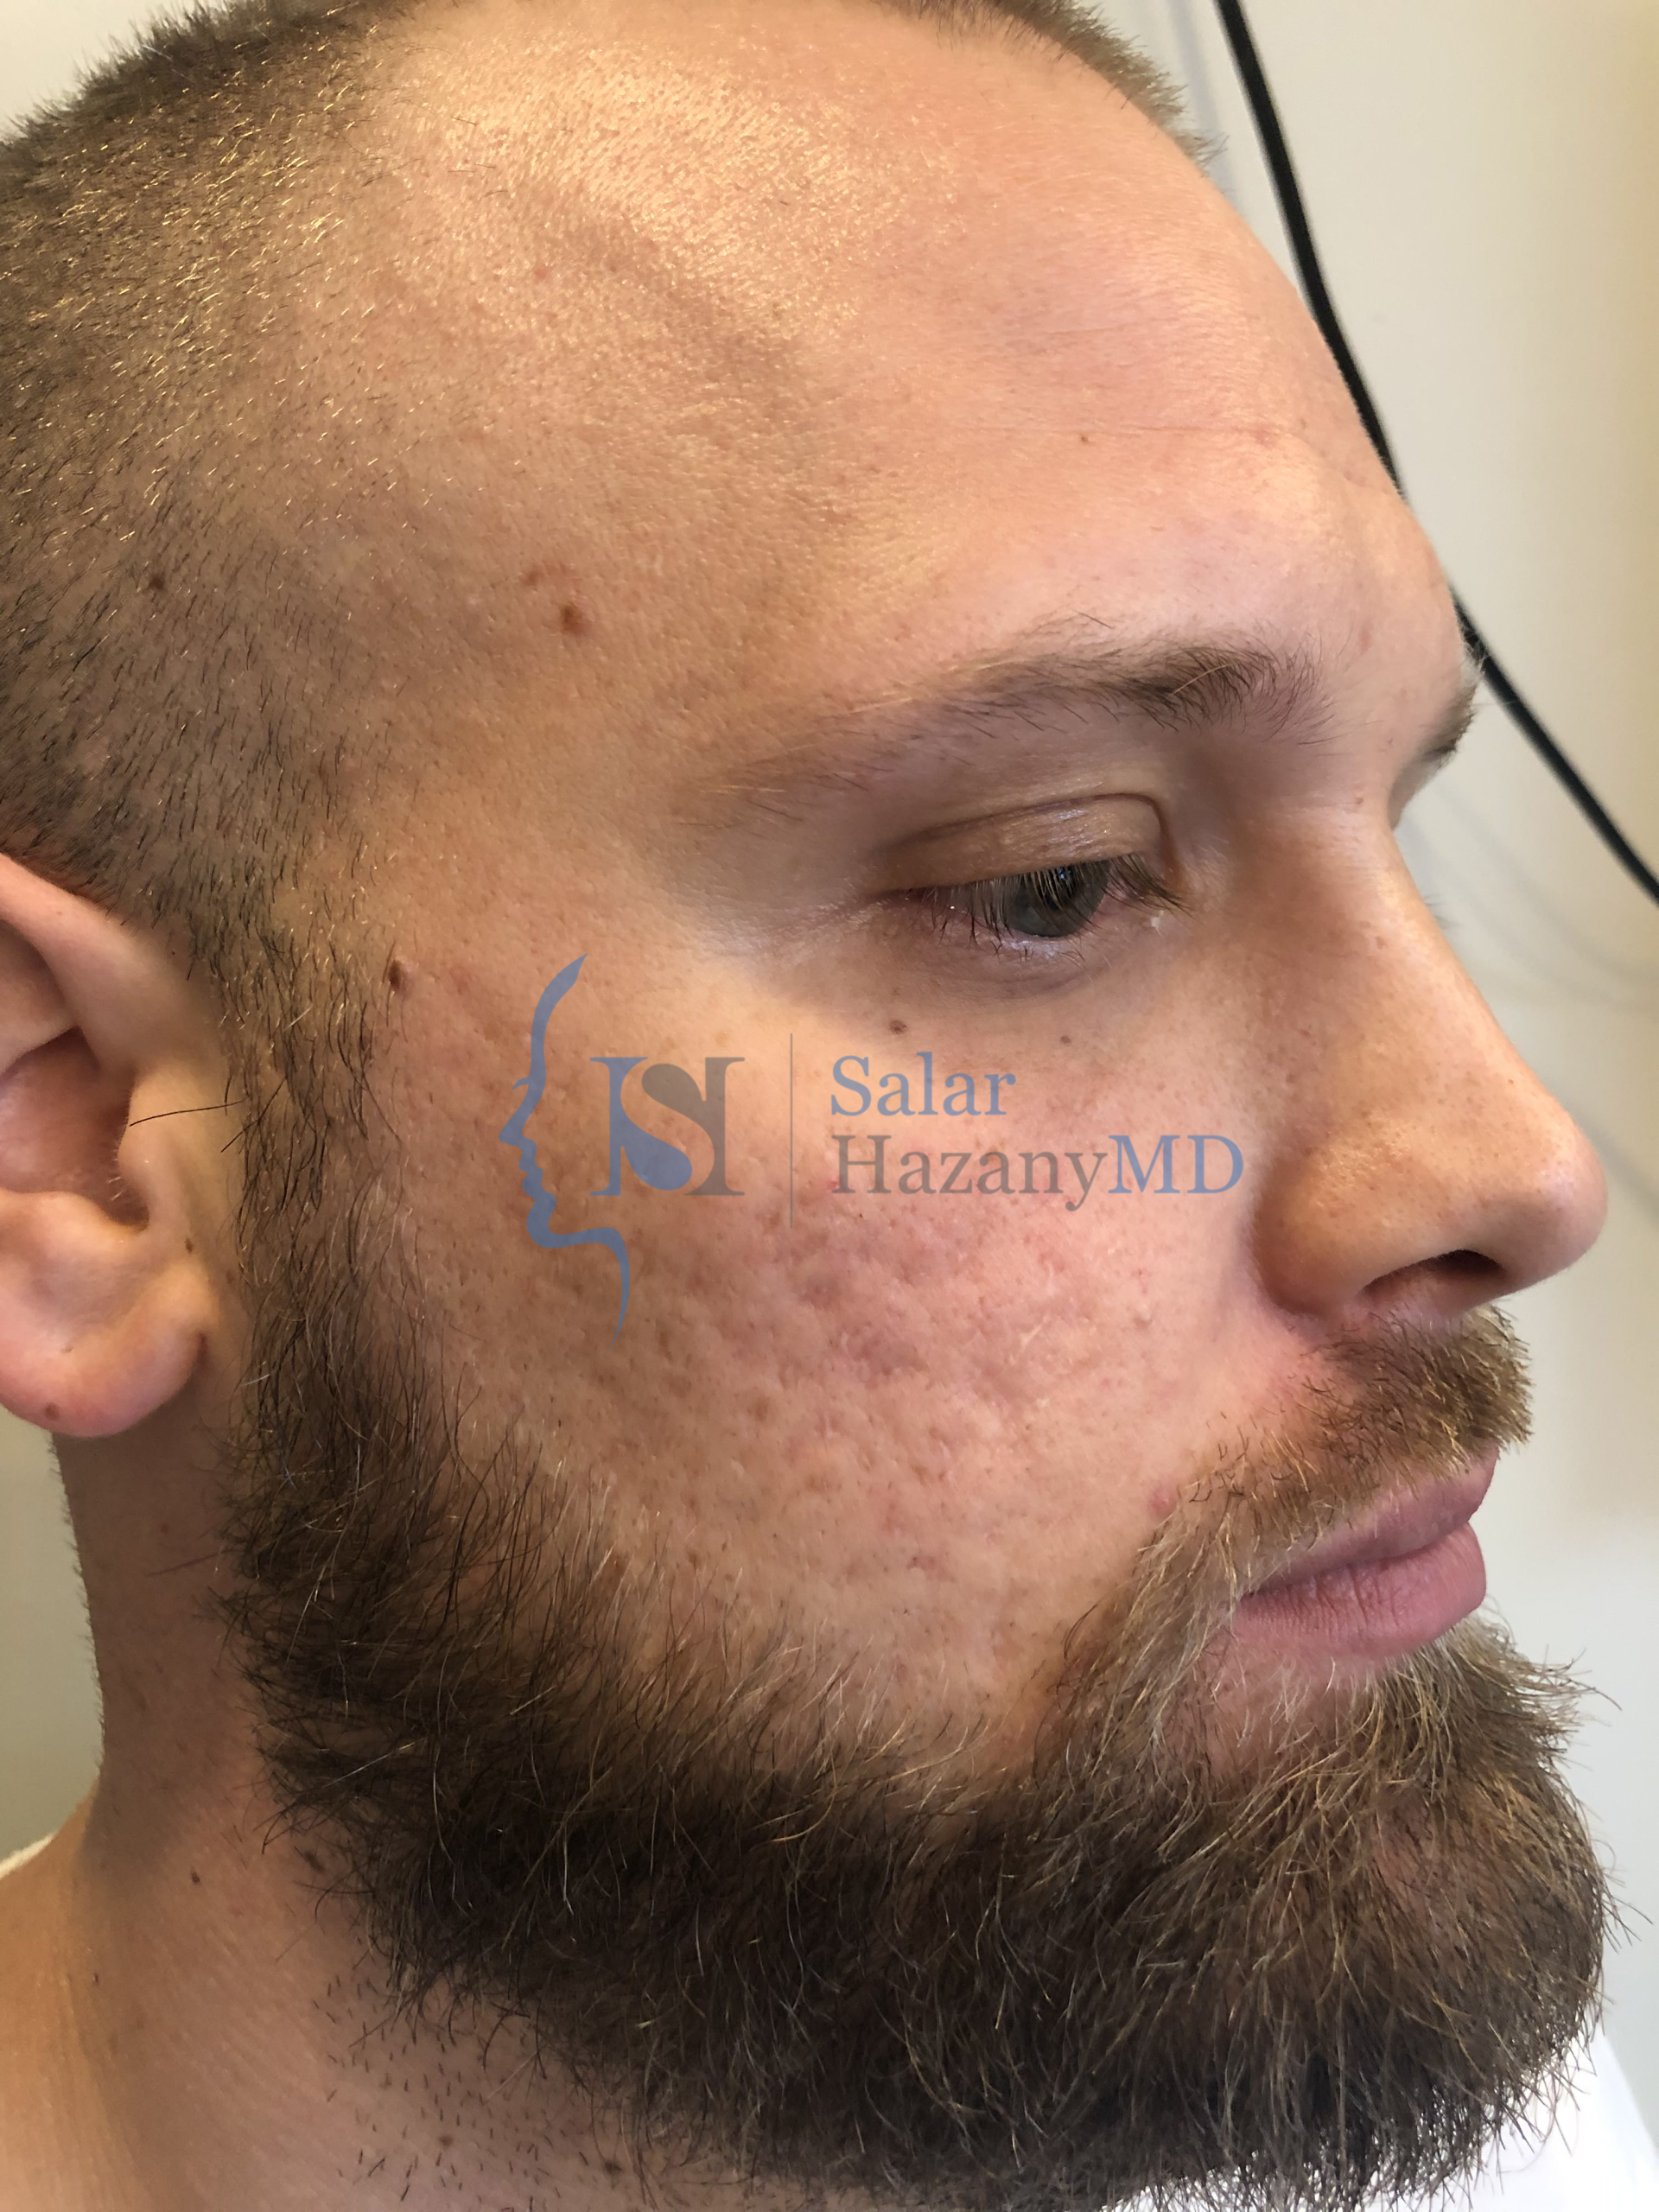 Side profile of bearded person with acne scars